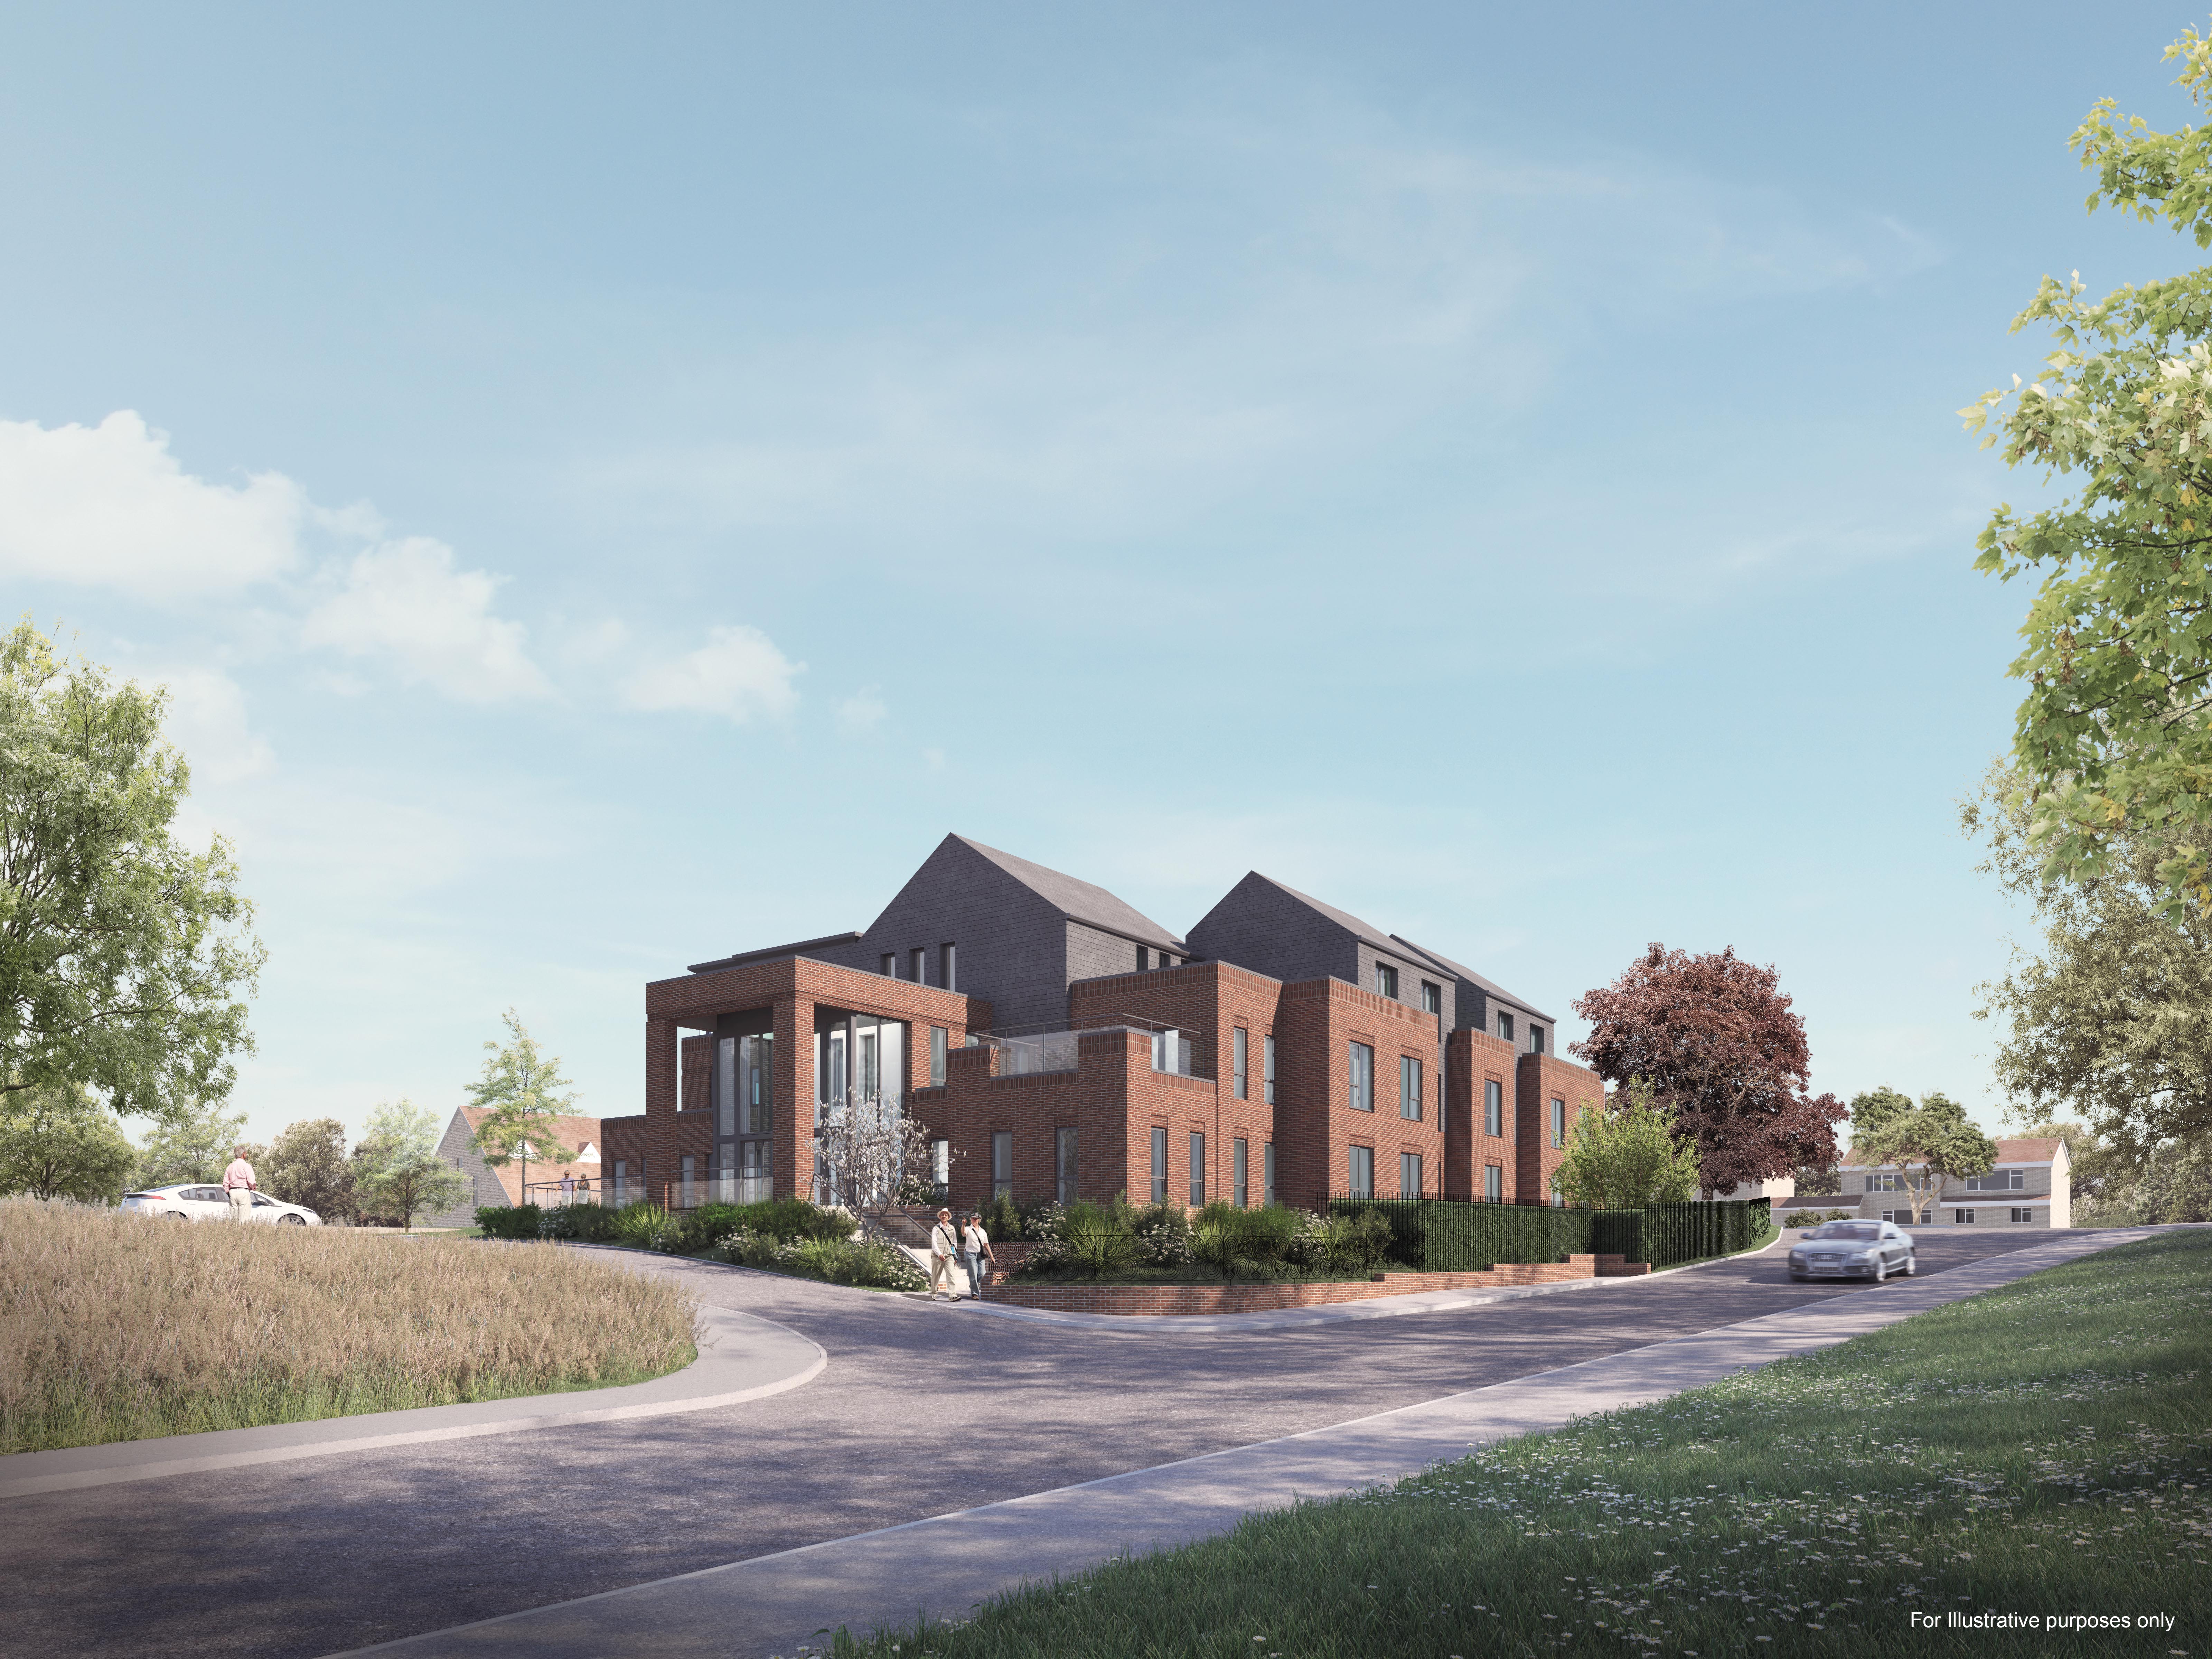 CGI of planned care home development scheme in Kent